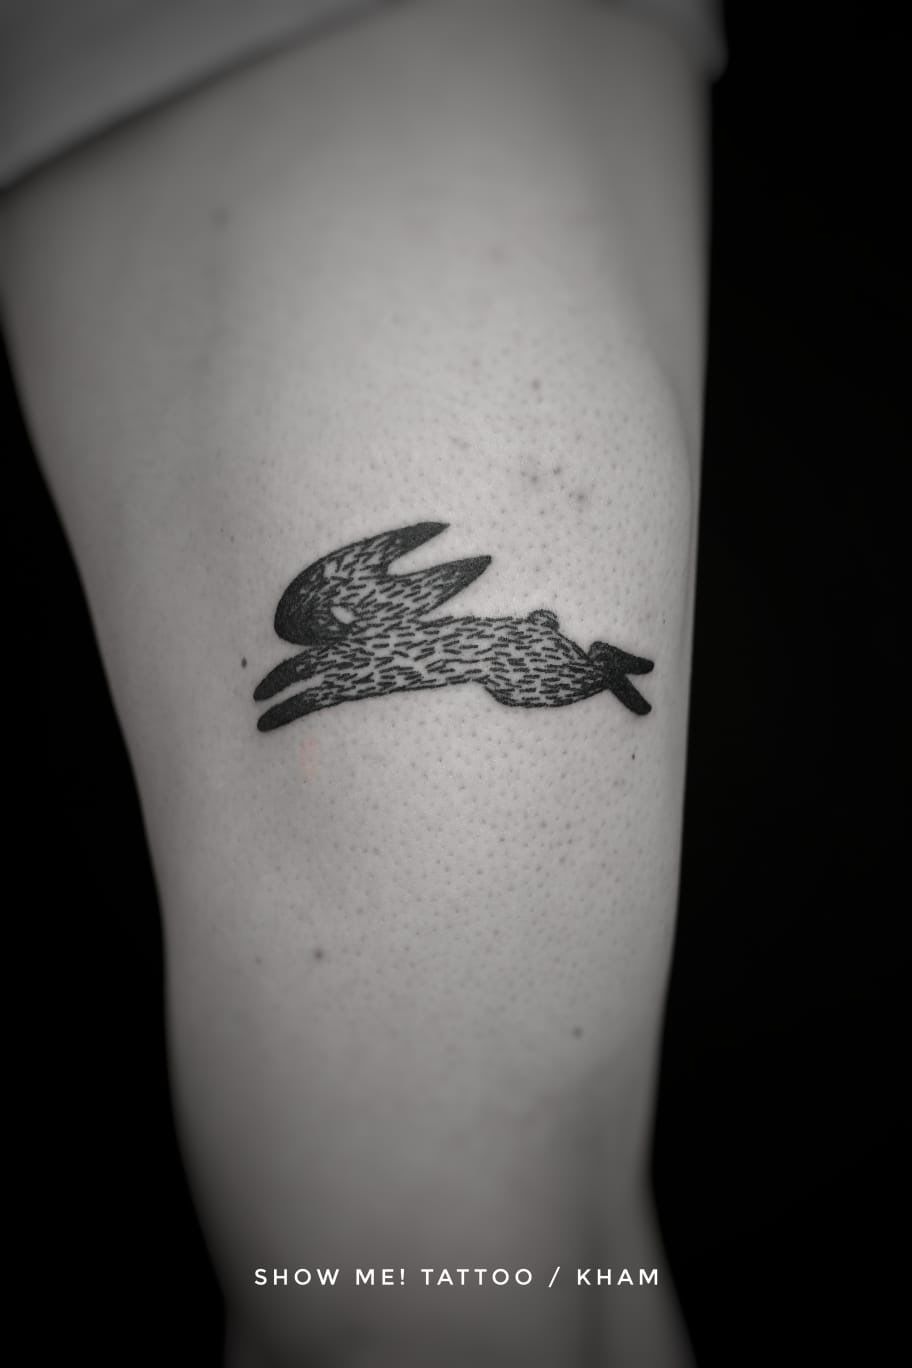 150 Loon Tattoo Ideas To Help Thrive In Harsh Conditions